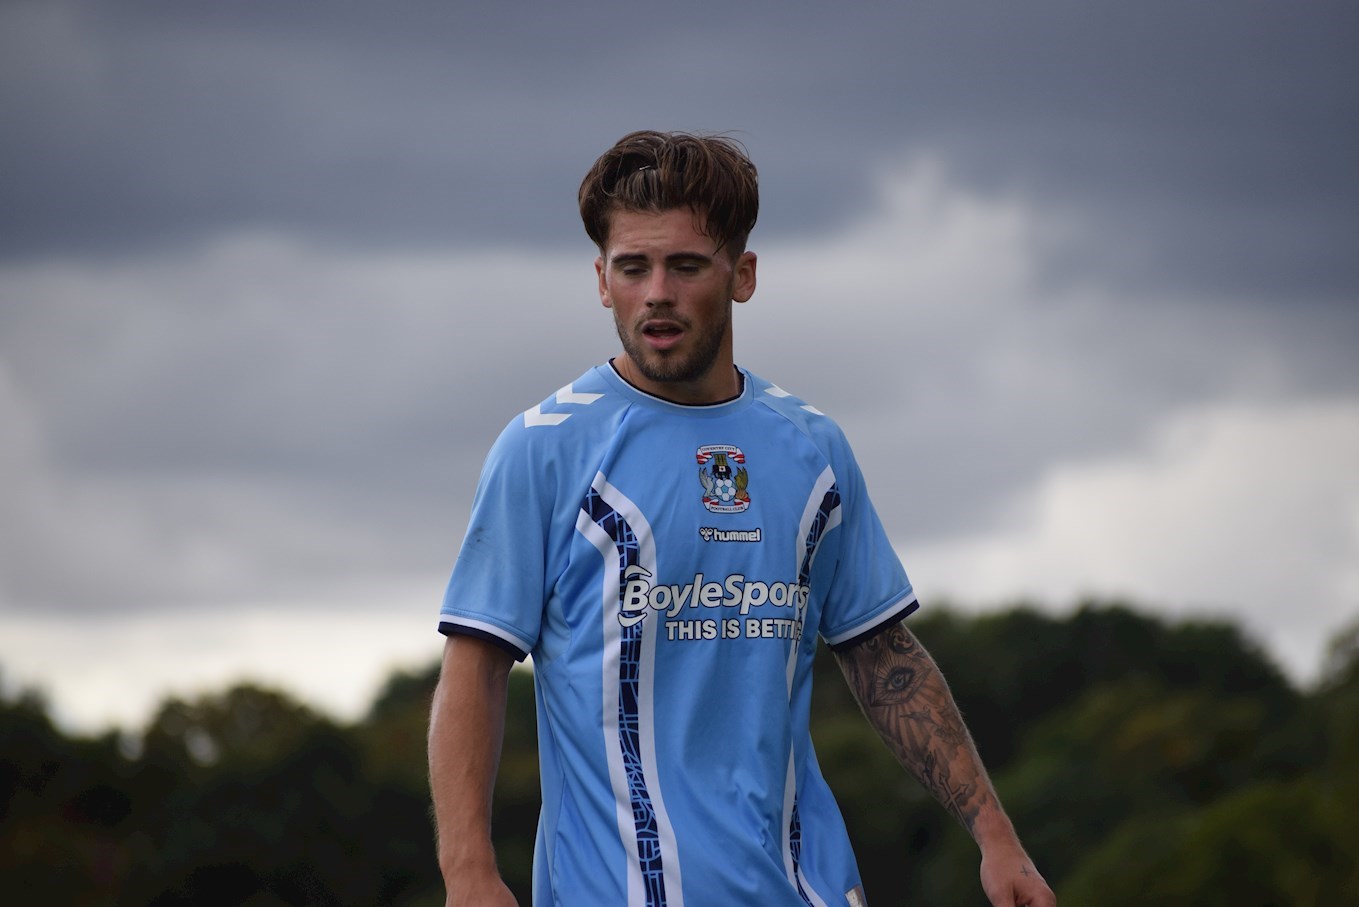 TRANSFER: Danny Cashman joins Altrincham FC on loan - News - Coventry City